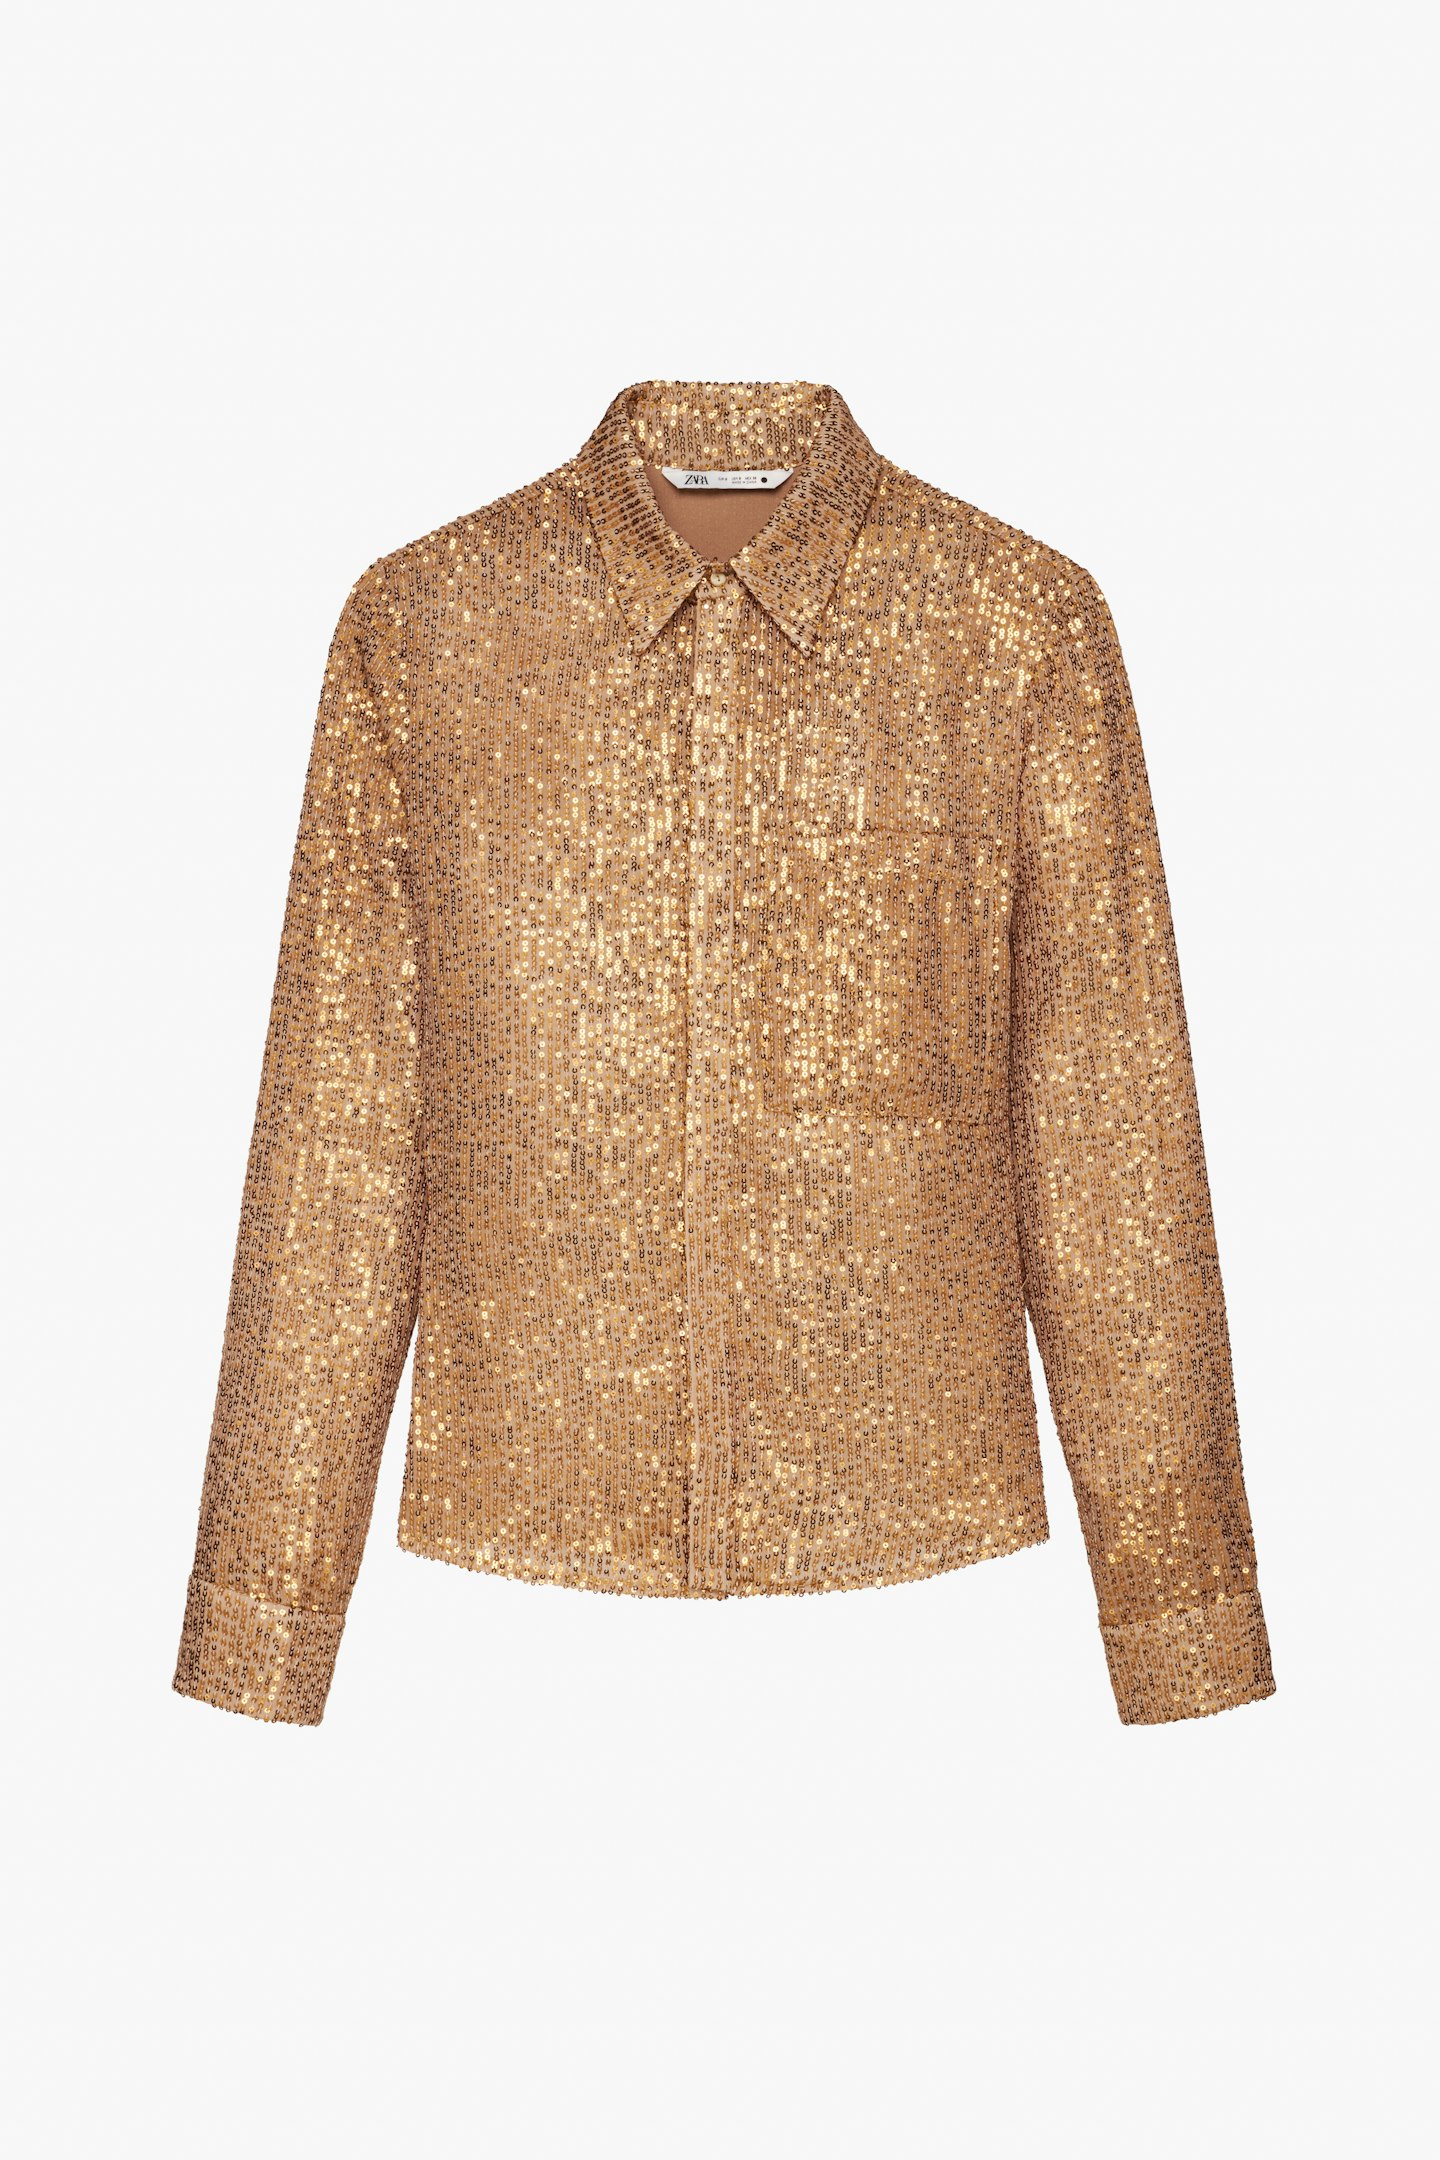 Limited Edition Sequin Shirt, £89.99